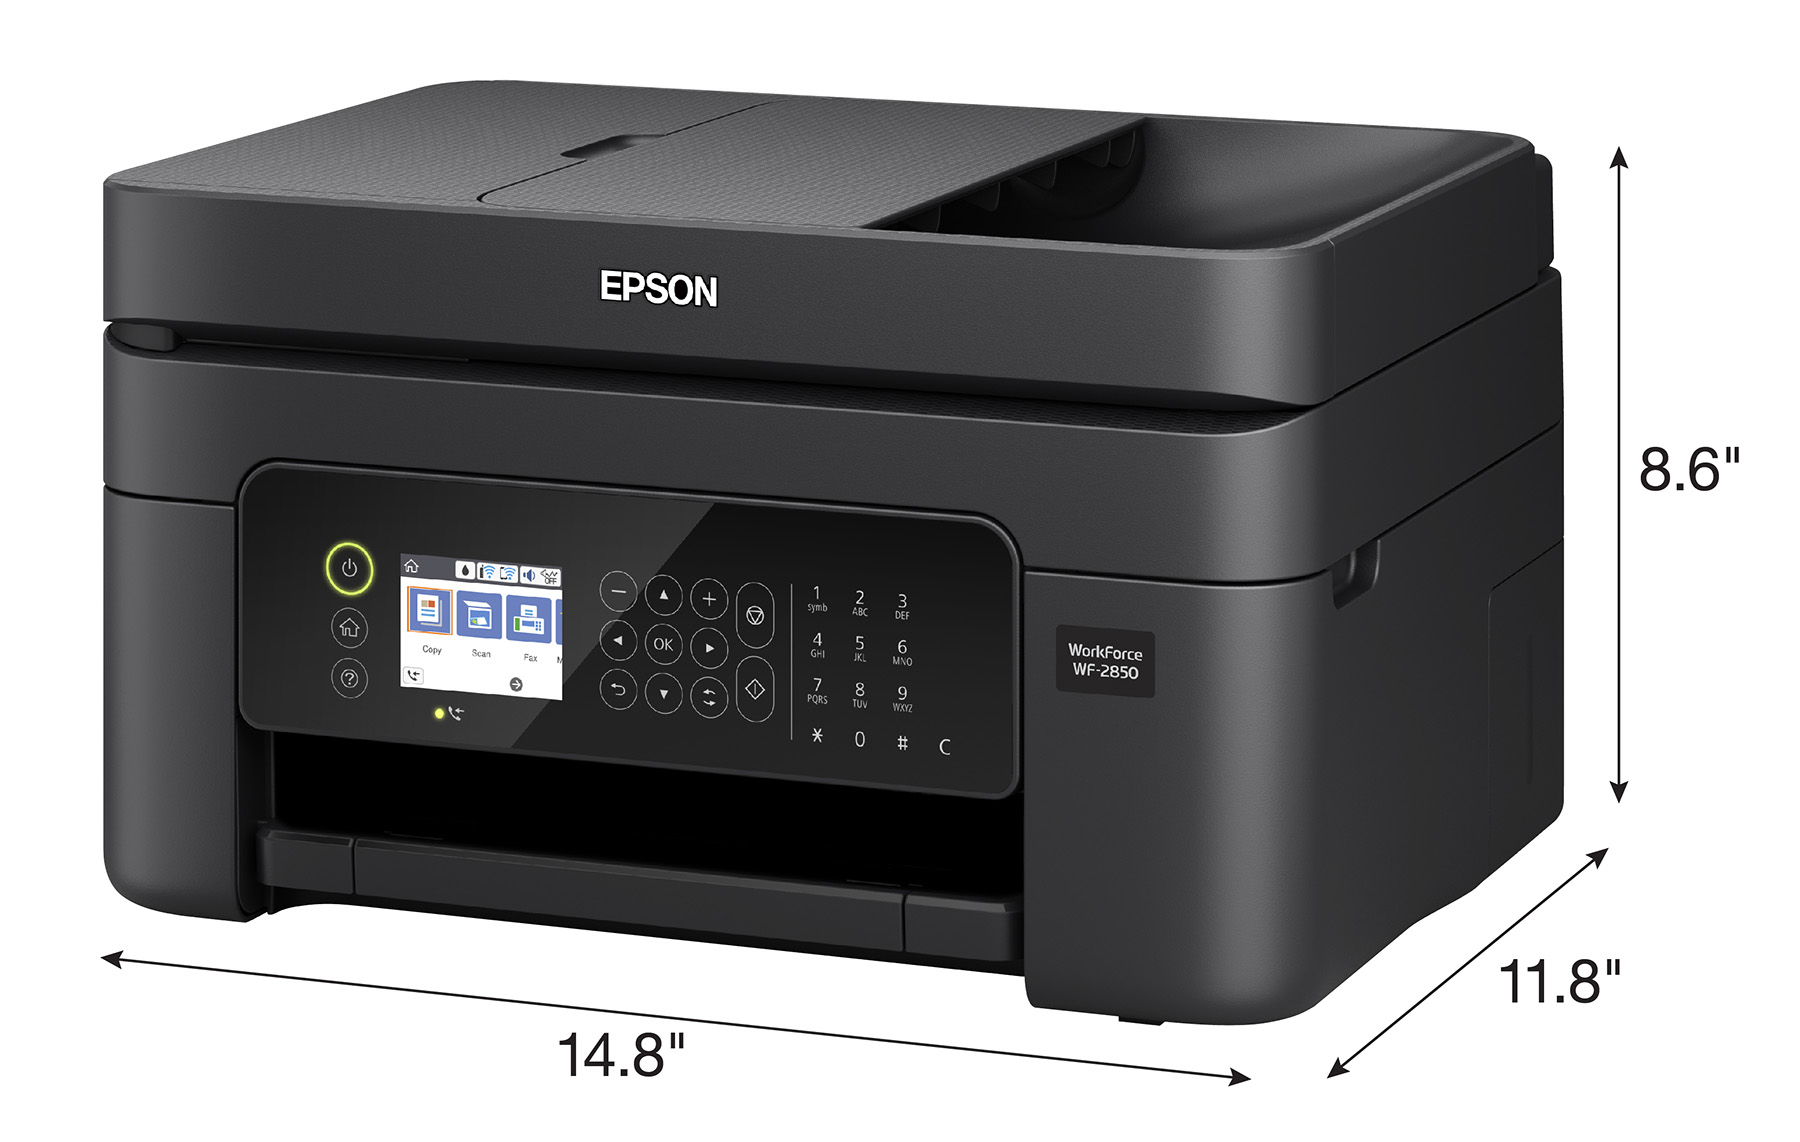 Epson WorkForce WF-2850 All-in-One Wireless Color Printer with Scanner, Copier and Fax - image 5 of 7